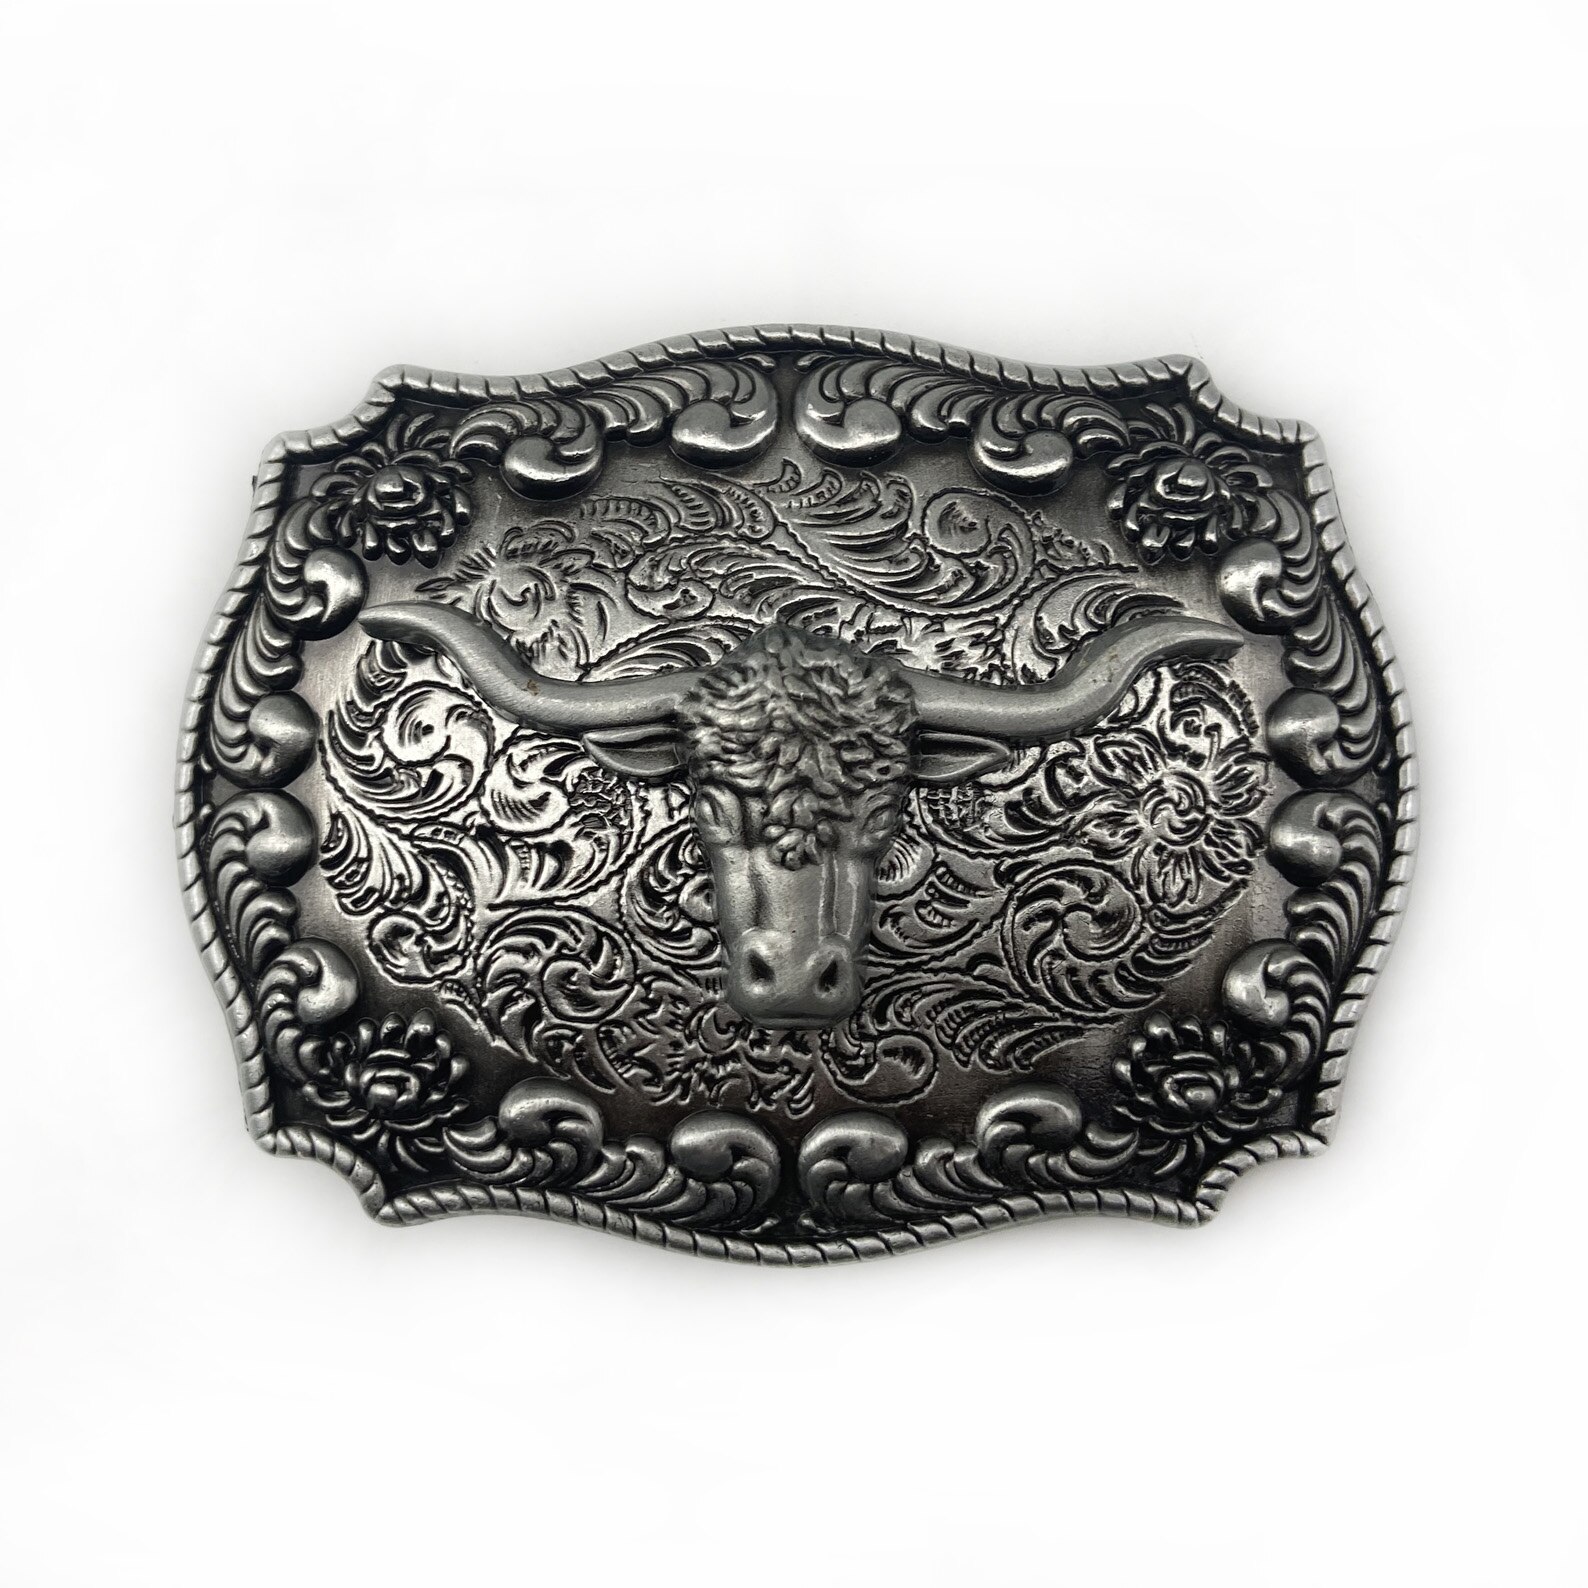 Rodeo Cowboy Bull Metal Buckle | 1,000+ Belt Buckles | Free Shipping!